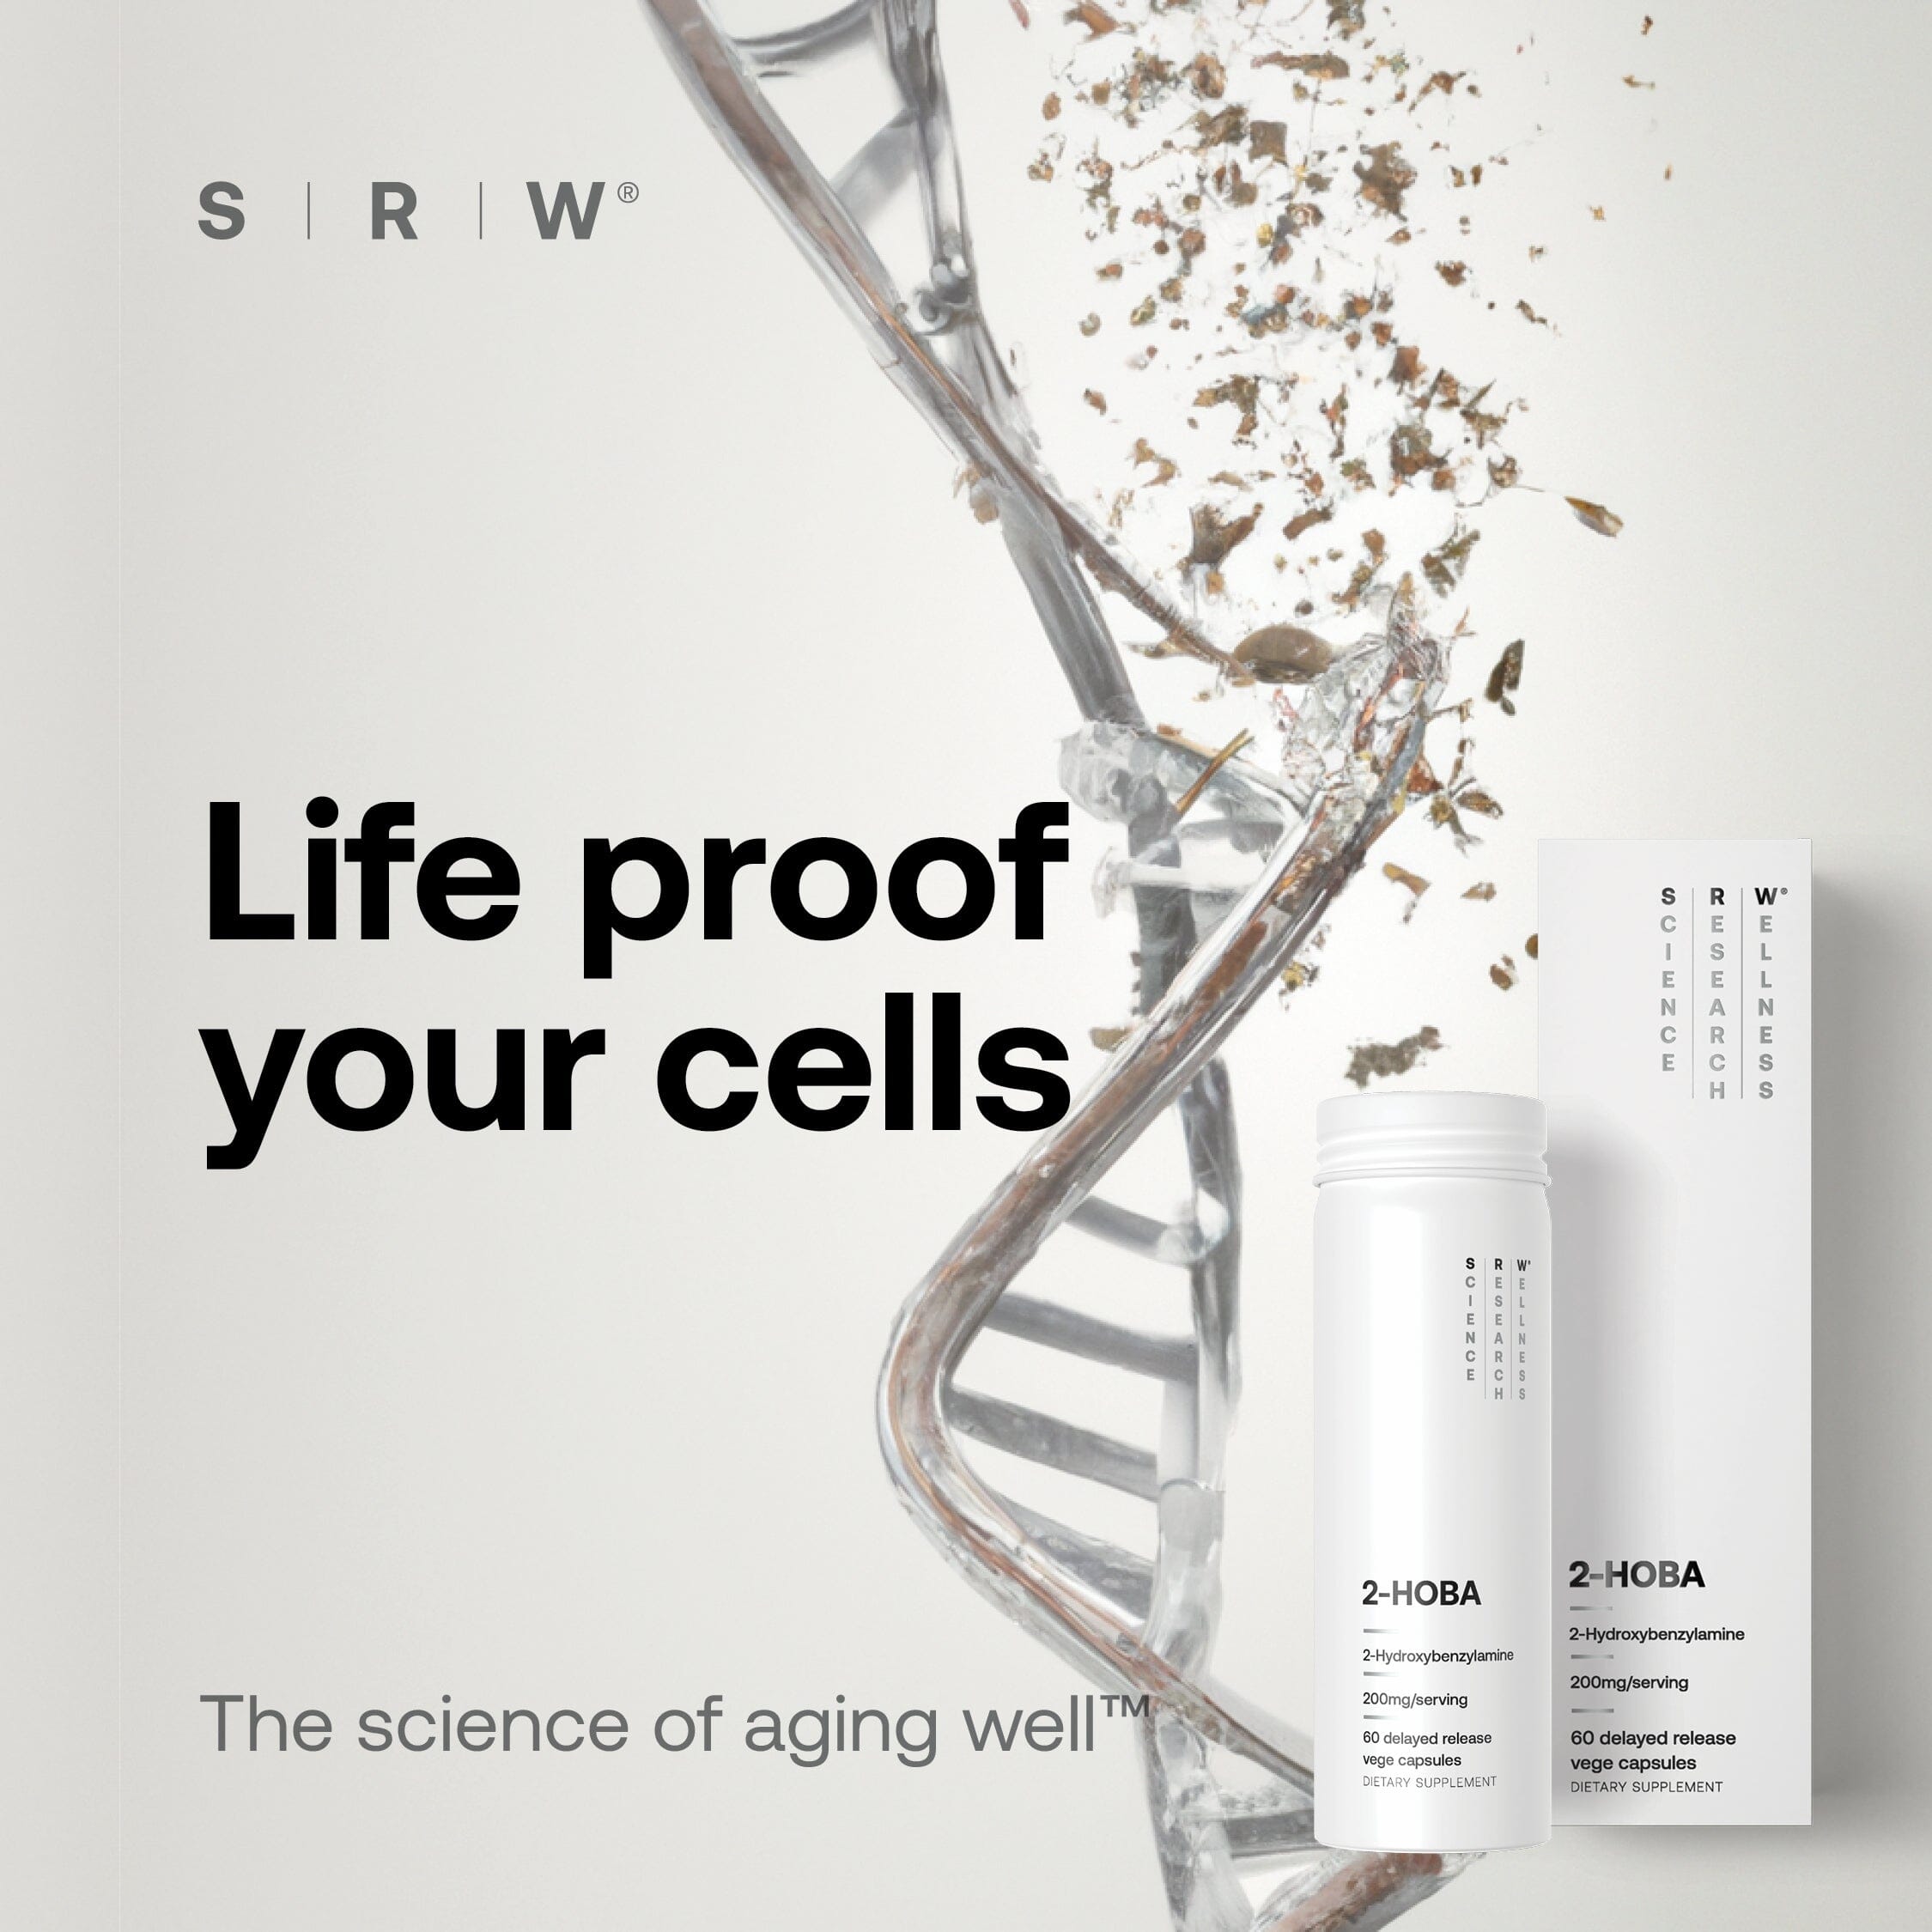 SRW Laboratories second in the world to license breakthrough nutrient that offers next-level free radical protection